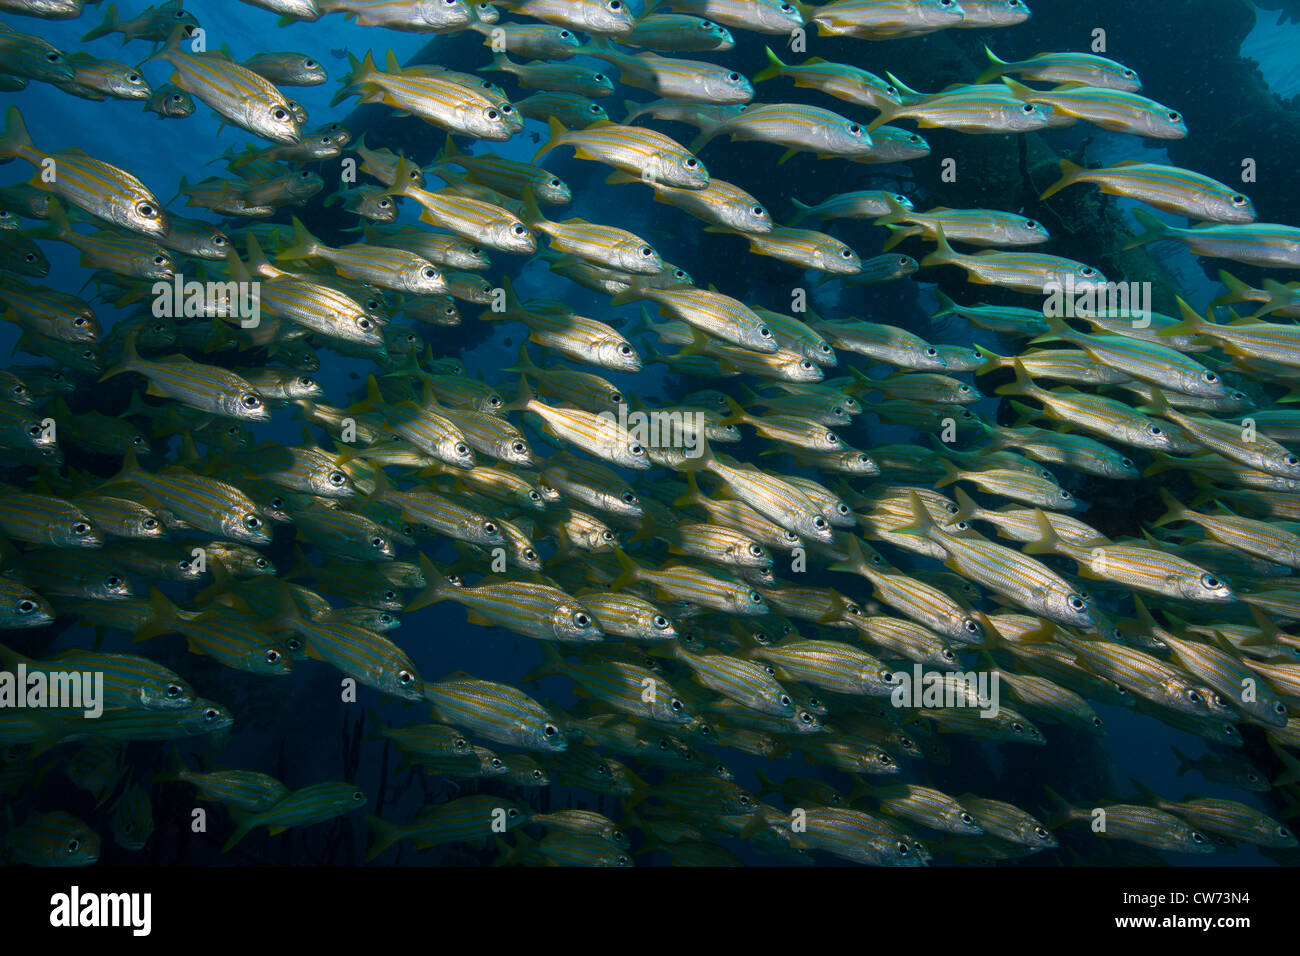 Schooling grunts among the pilings at the Salt Pier, Bonaire. Stock Photo